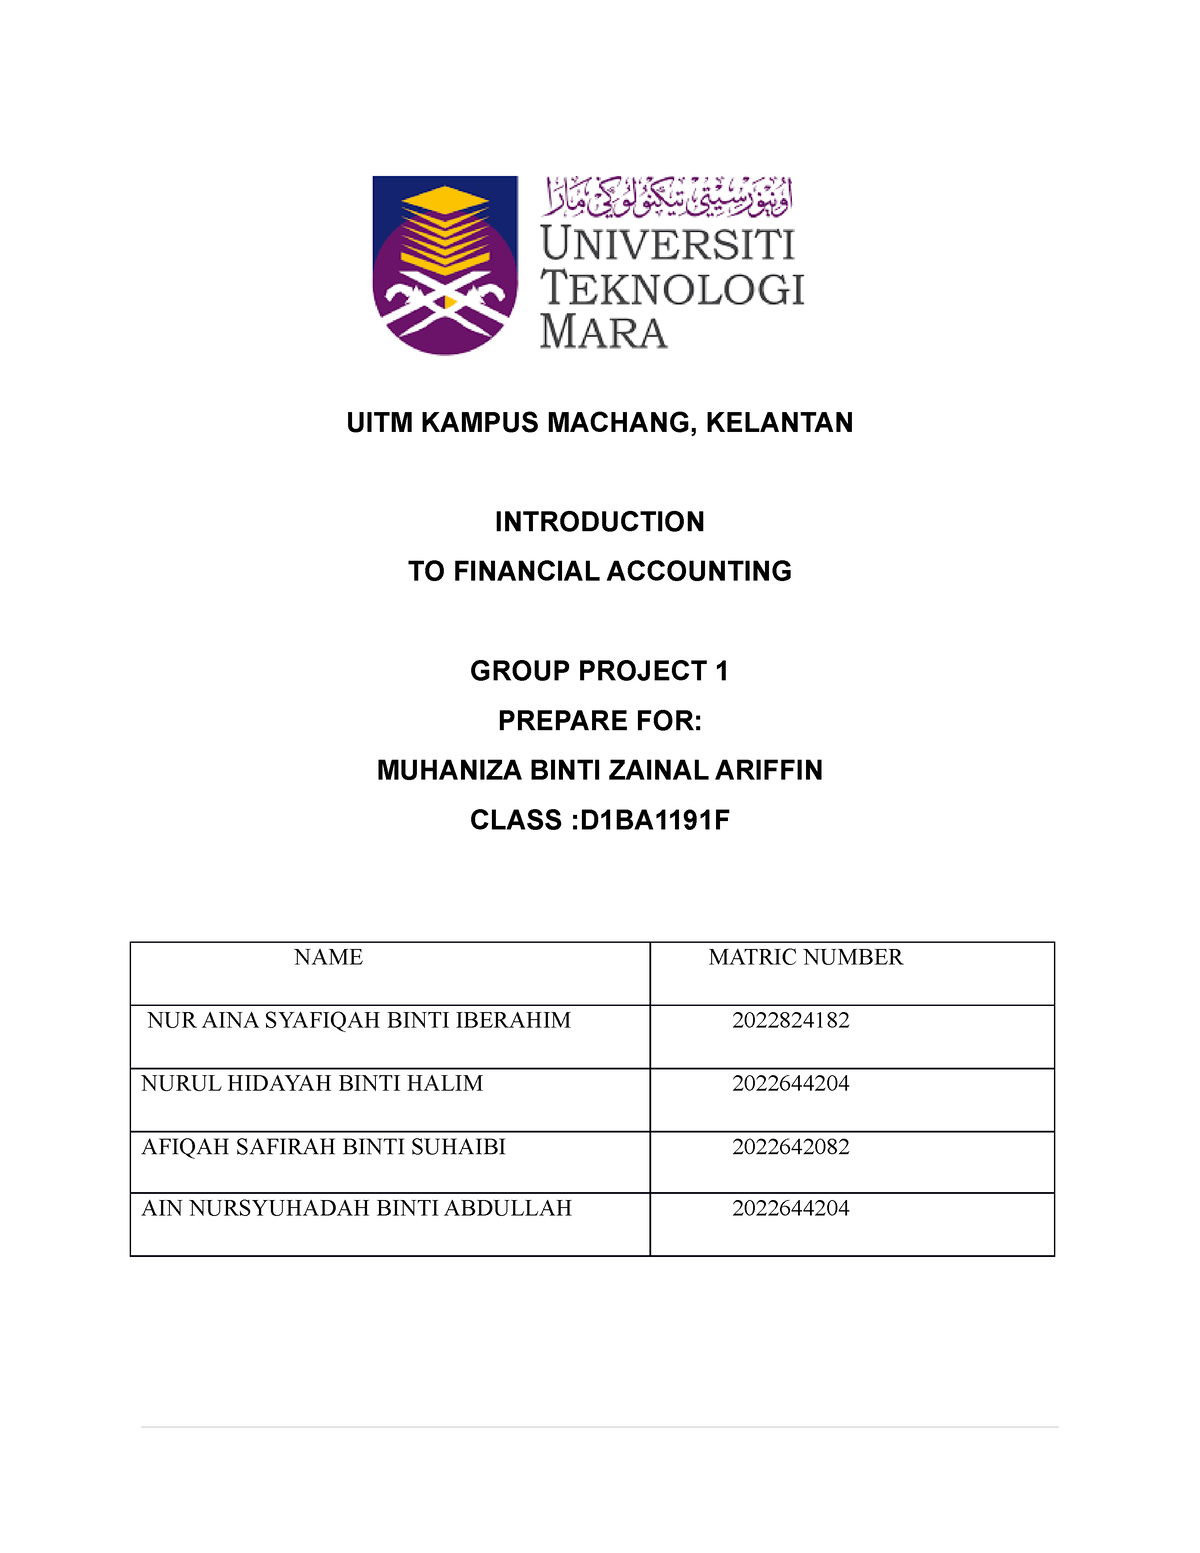 group assignment acc117 uitm